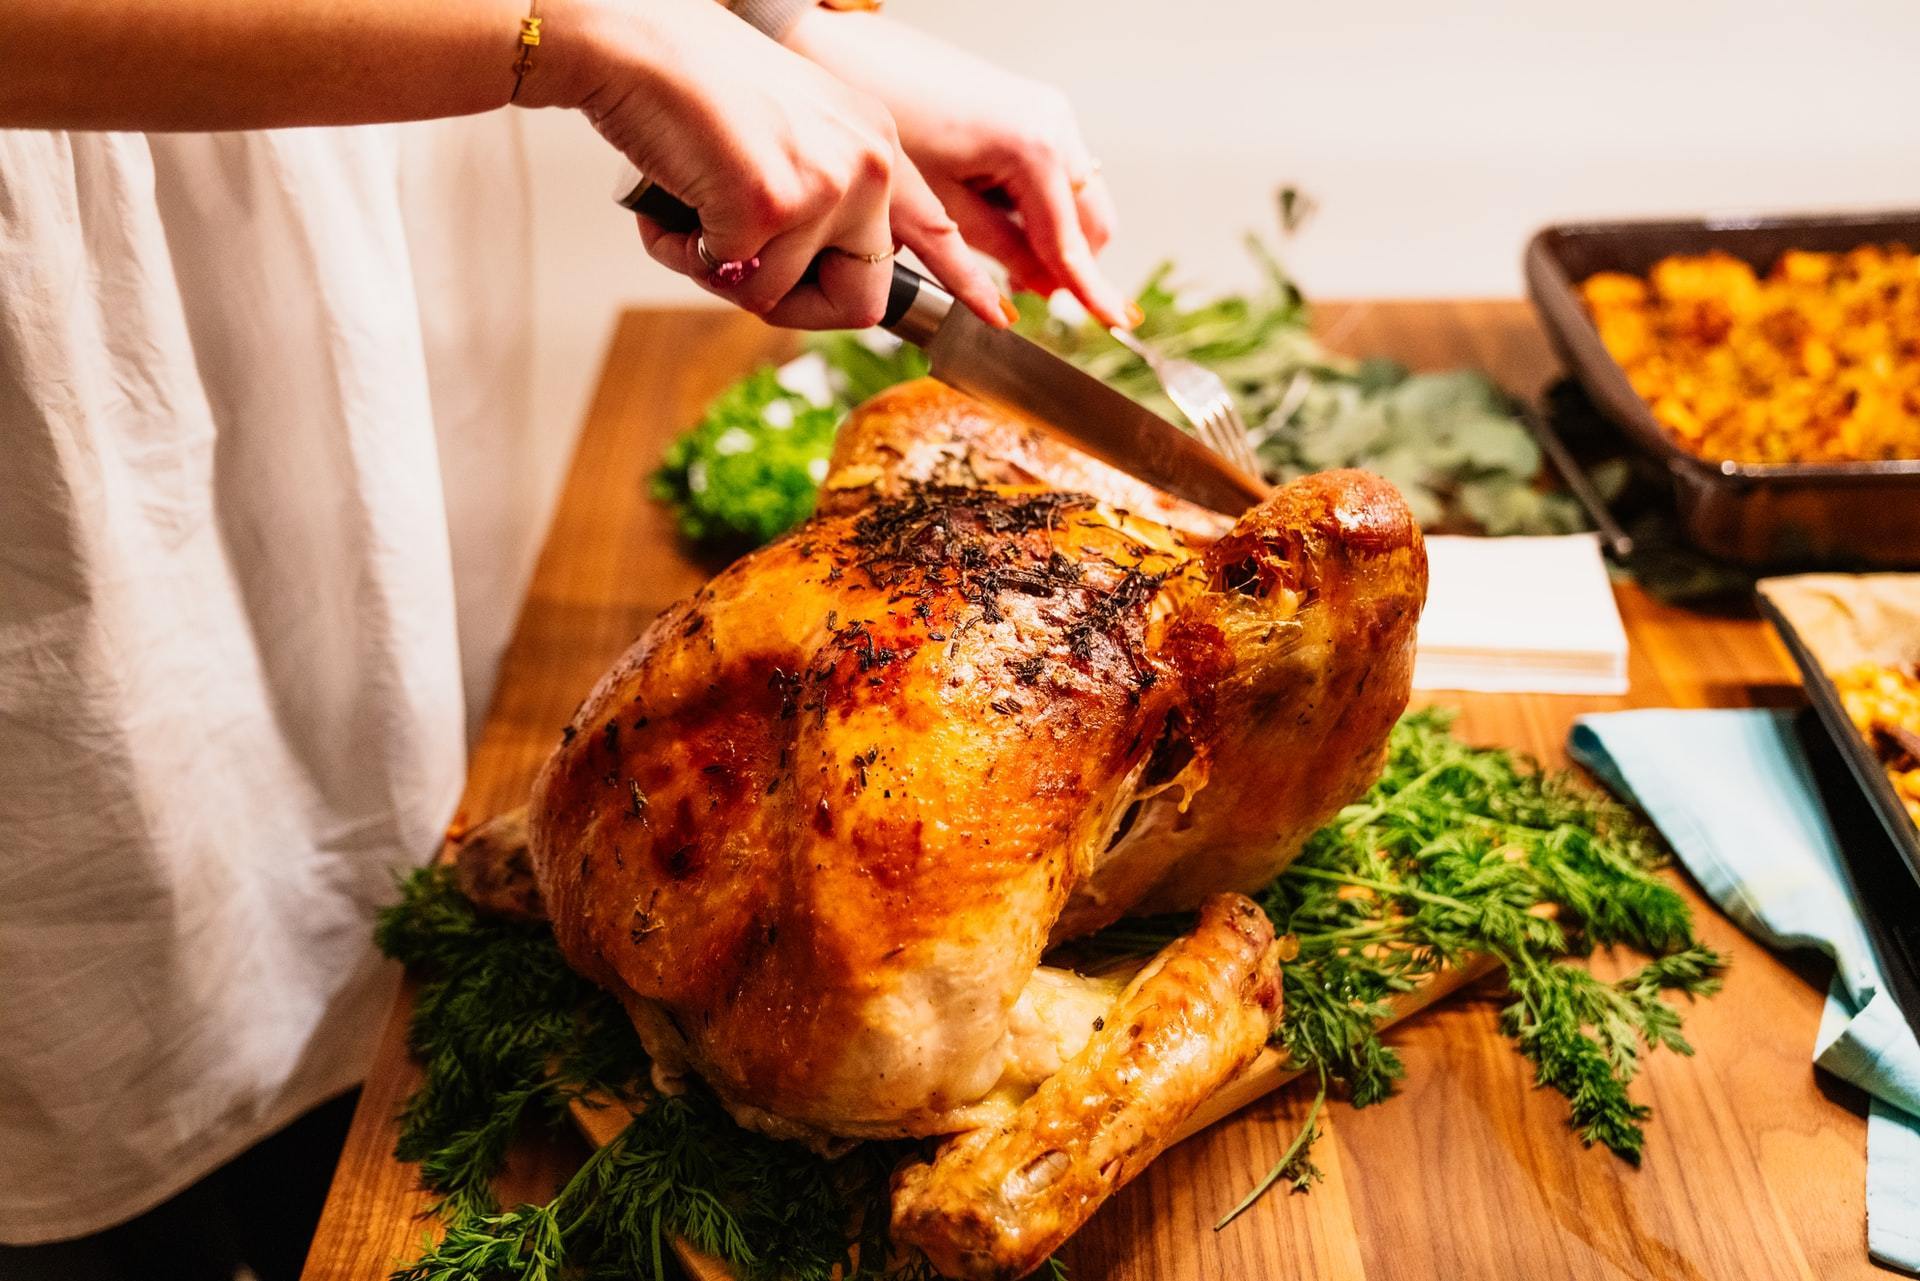 What Is A Turkey Baster And How Do You Use It?